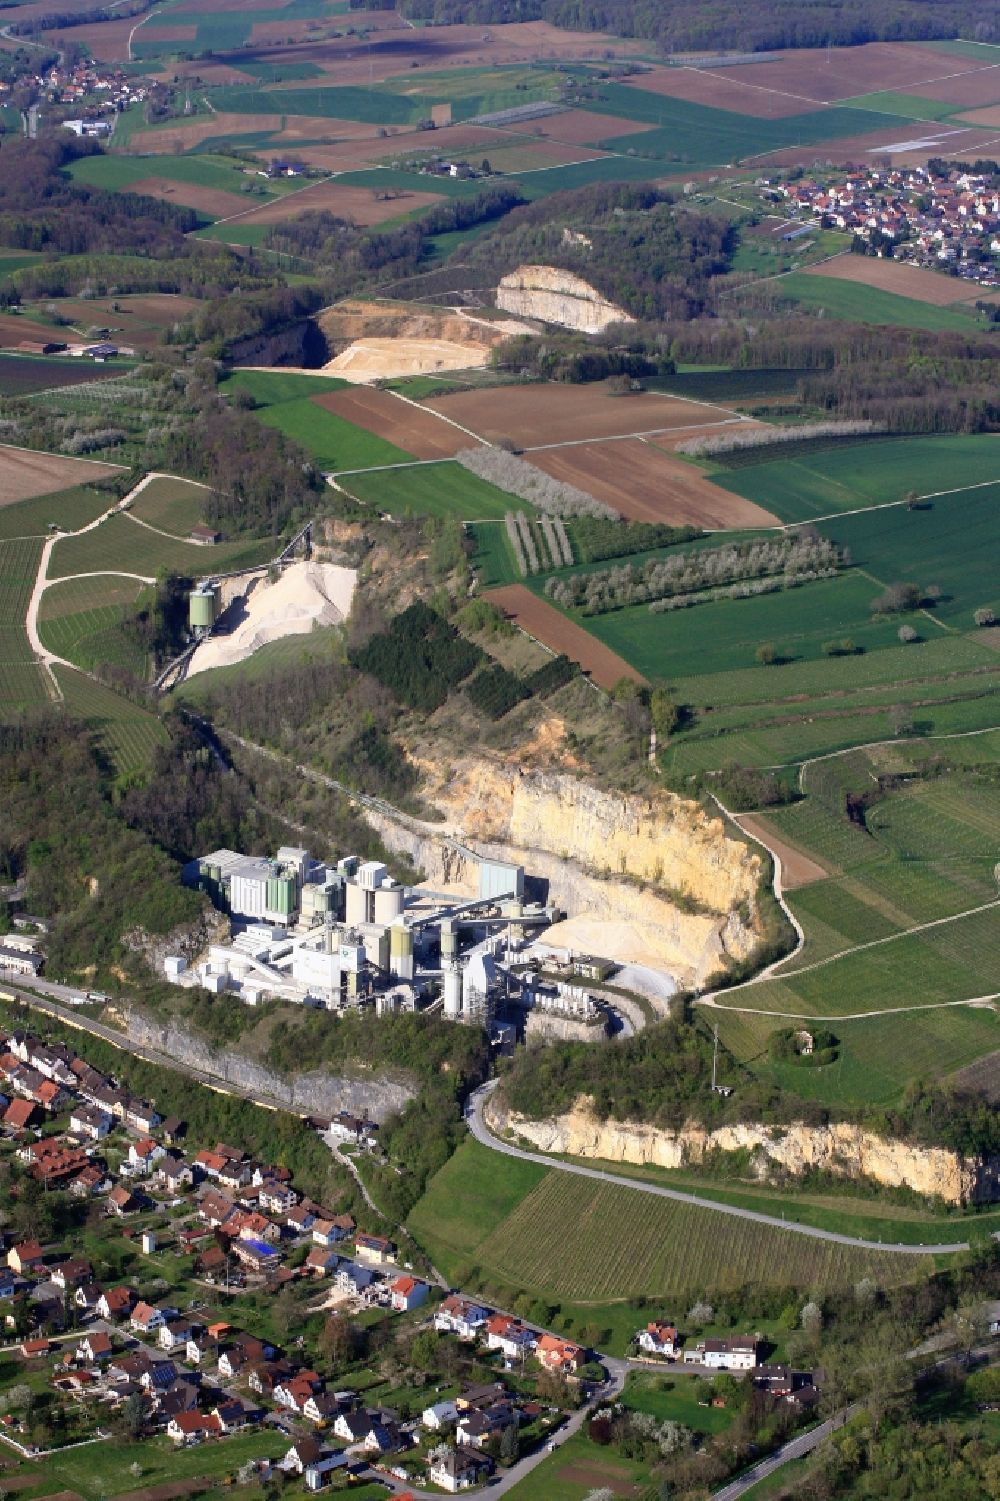 Efringen-Kirchen from above - The limestone mining area of Heidelberger Cement in the district Istein from Efringen-Kirchen in the state of Baden-Wuerttemberg